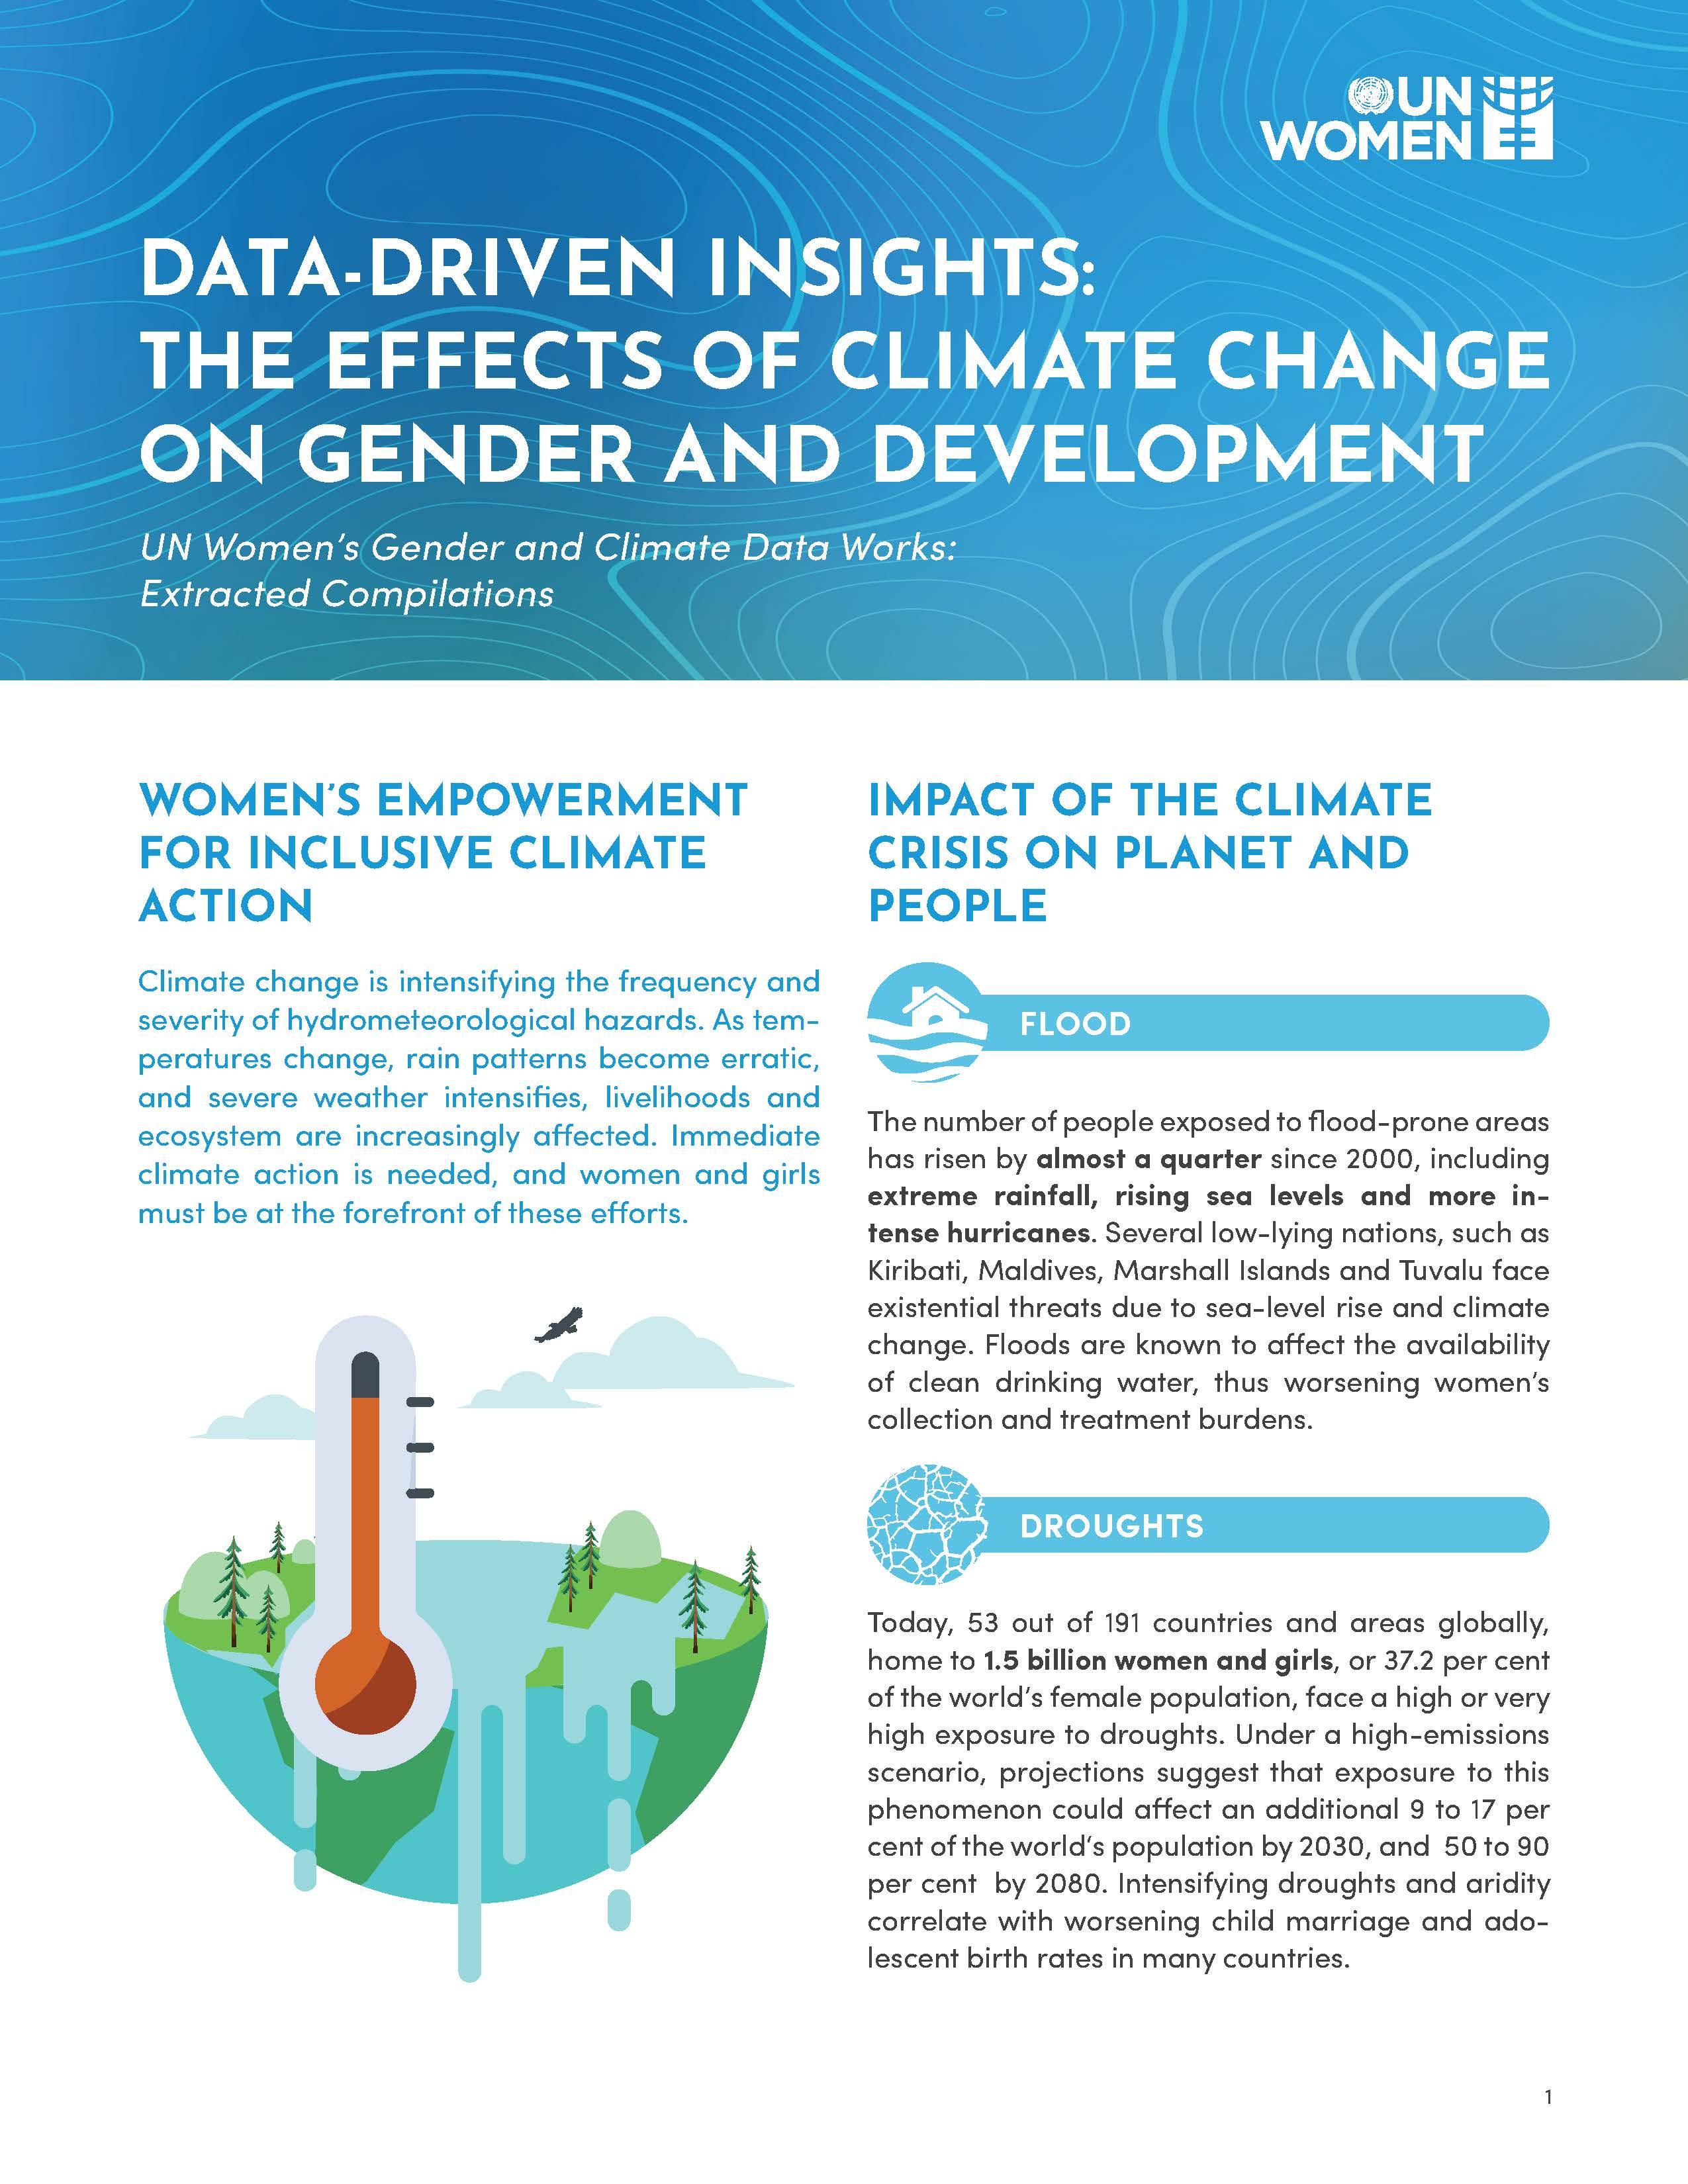 Data-driven insights: The effects of climate change on gender and development